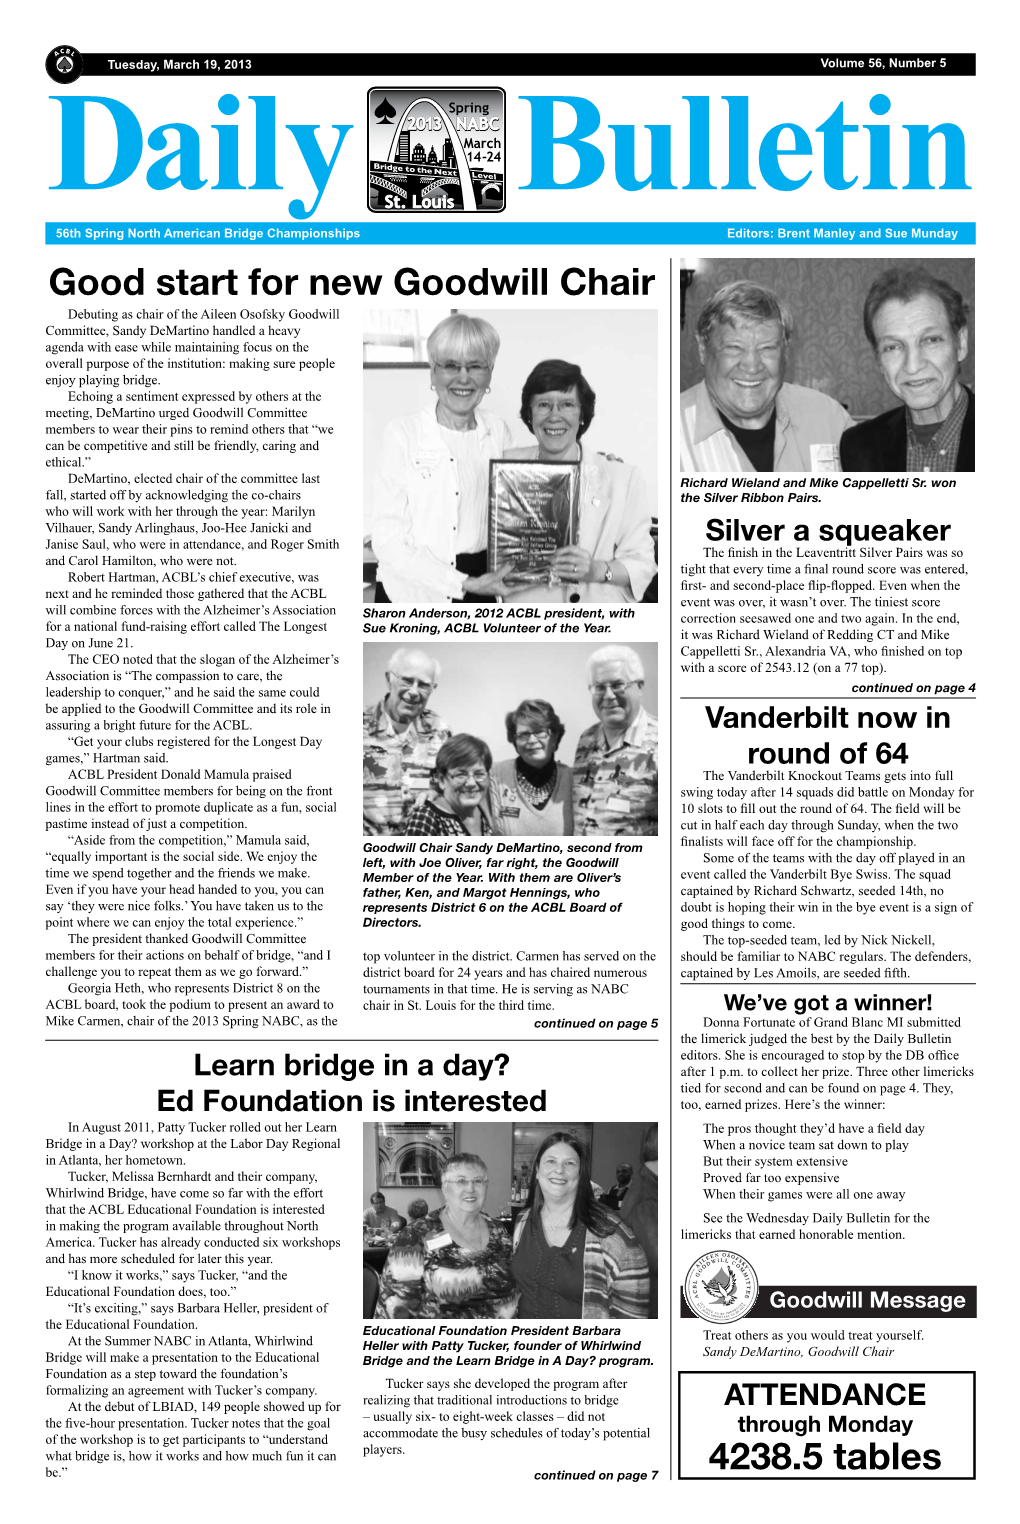 Good Start for New Goodwill Chair 4238.5 Tables